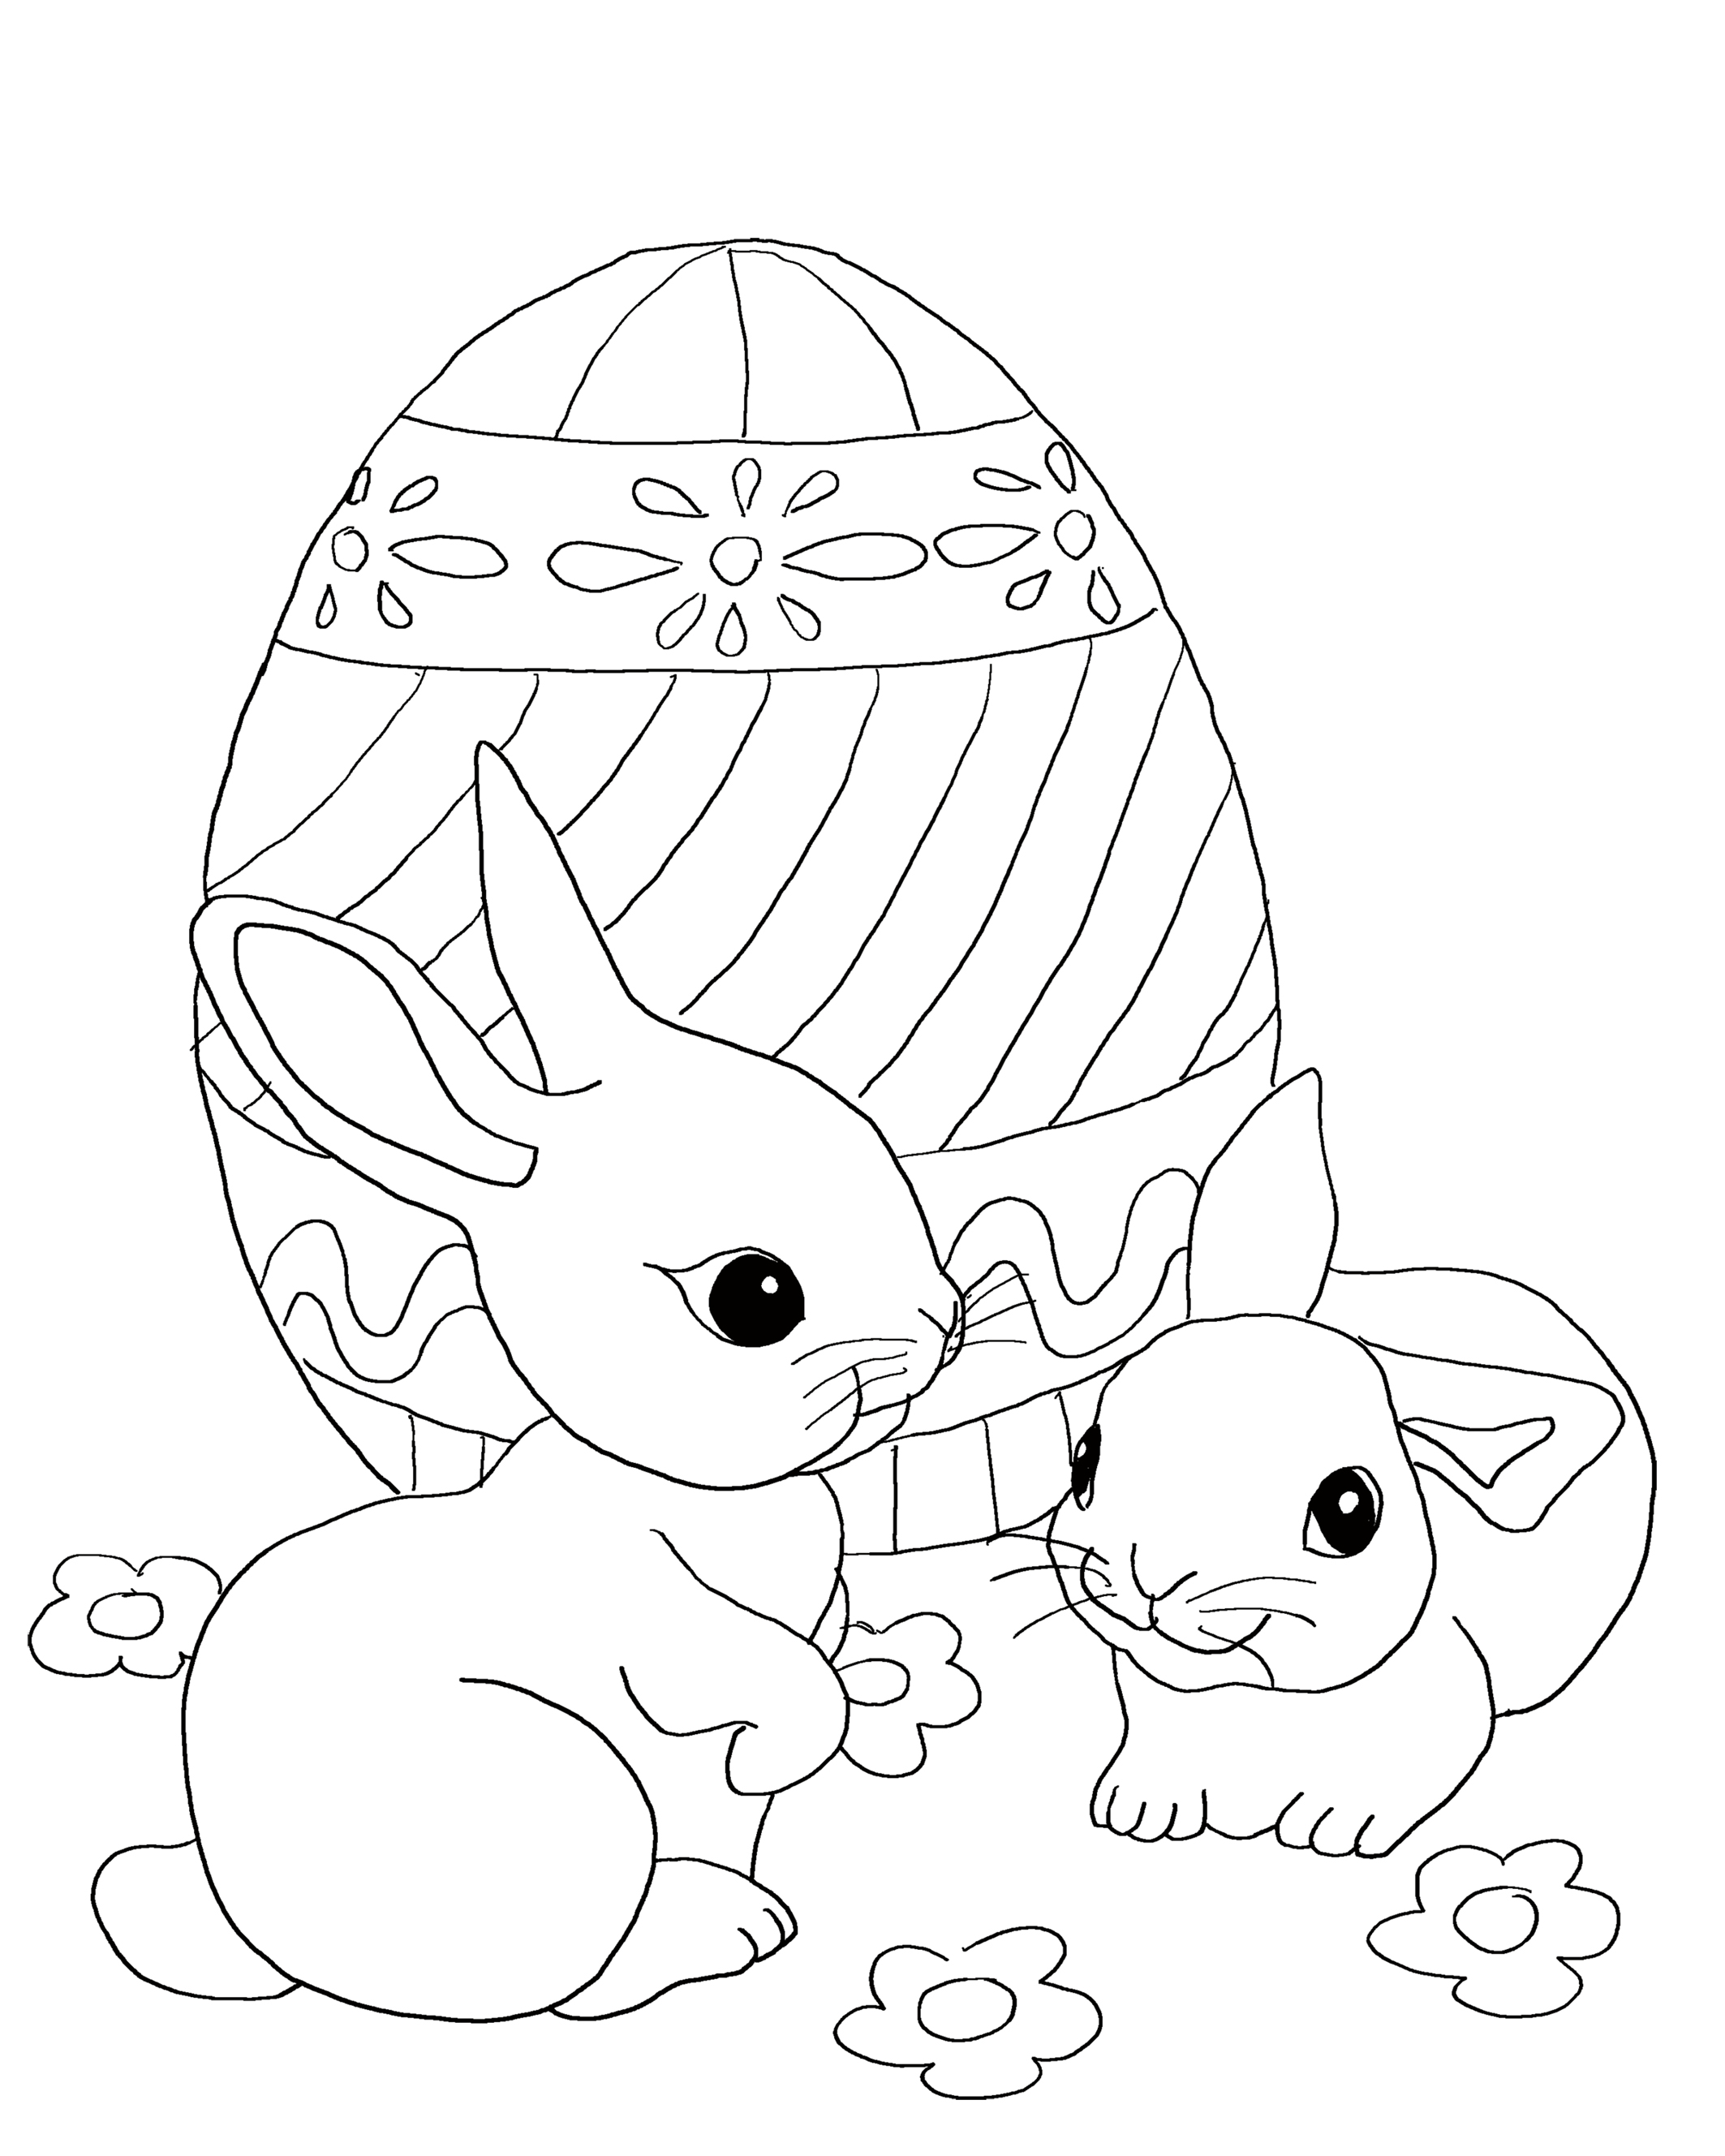 Free Easter Coloring Pages for Kids: High Printing Quality